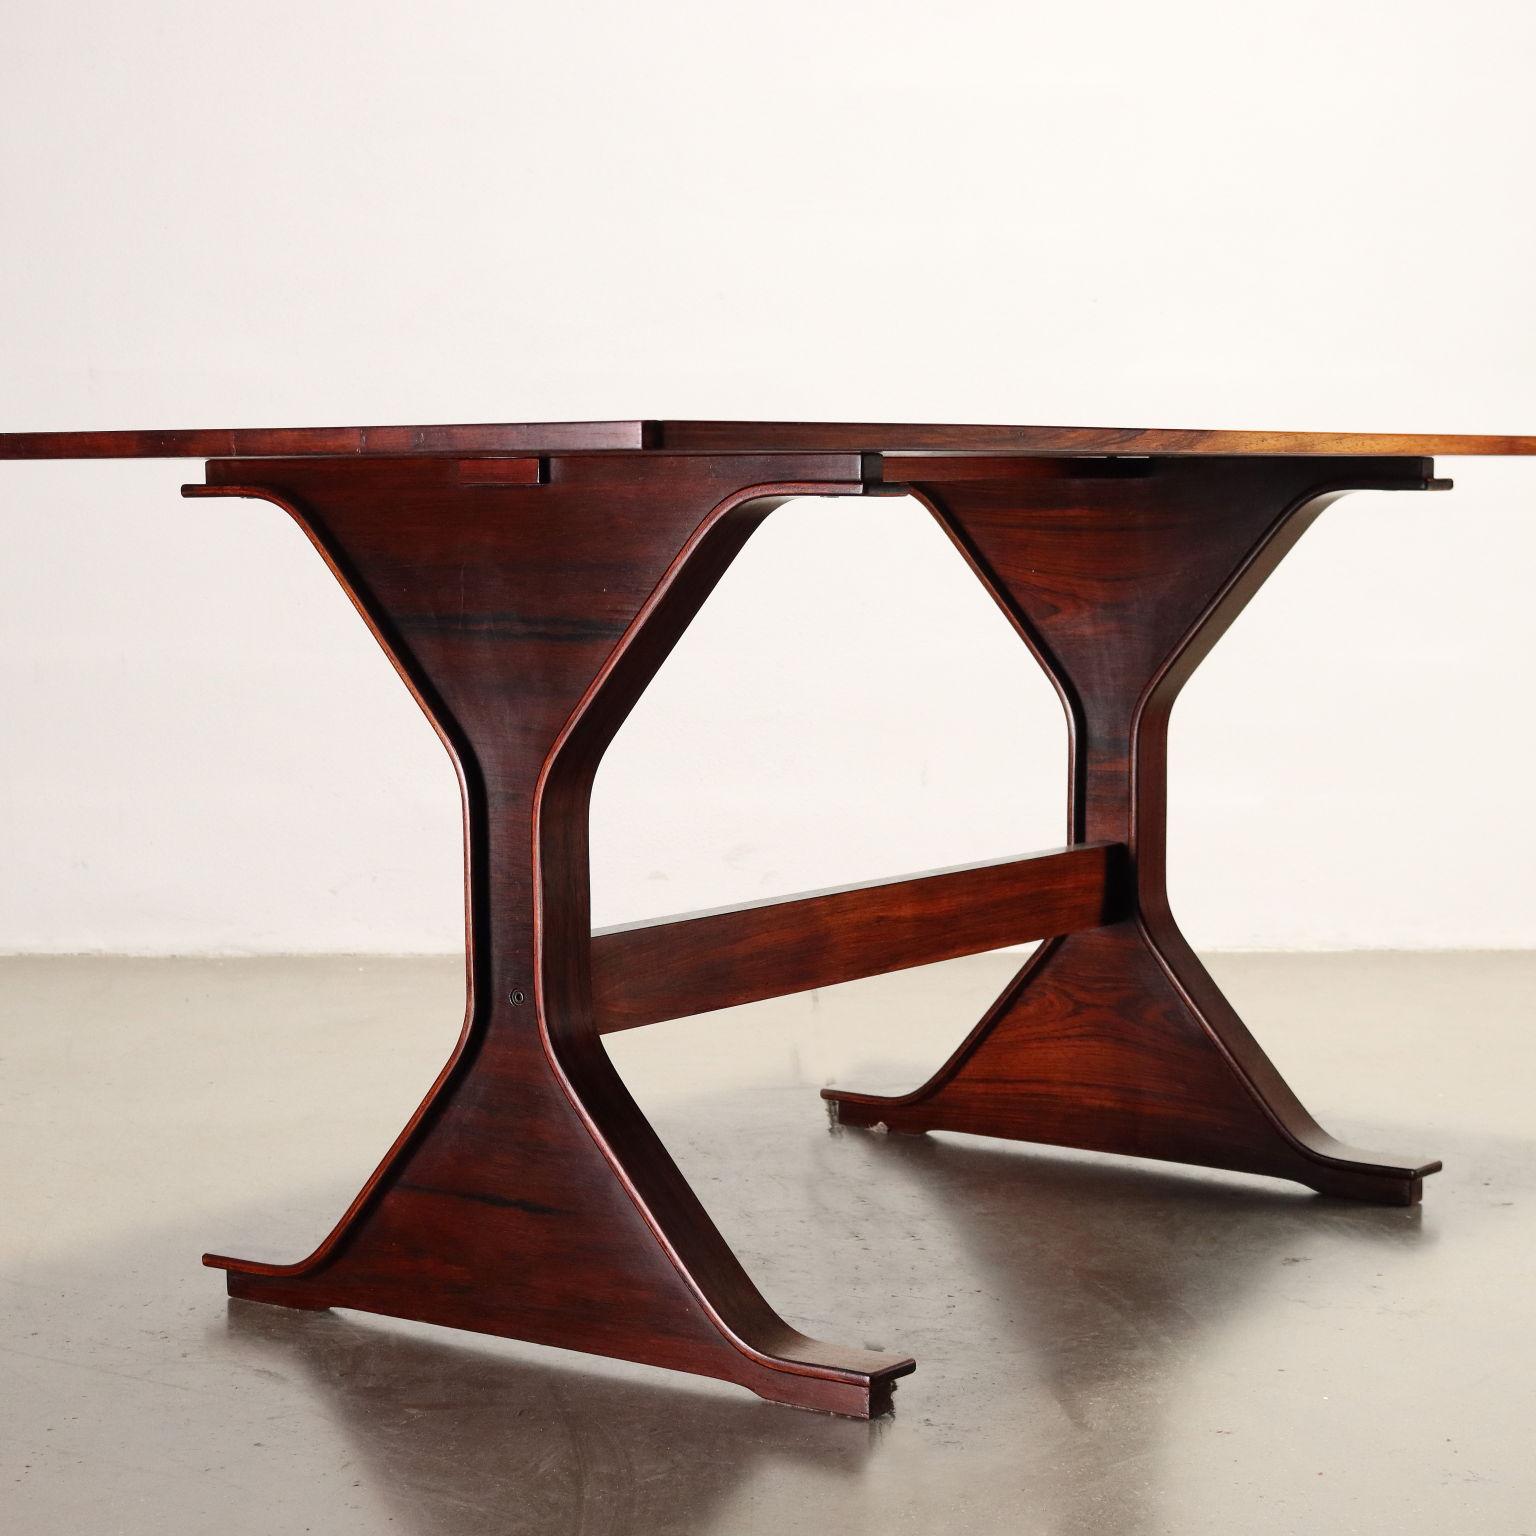 Exotic wood table with curved solid wood frame. Model No. 522, designed by Gianfranco Frattini and produced by Bernini starting in 1960.  Completely restored furniture. 